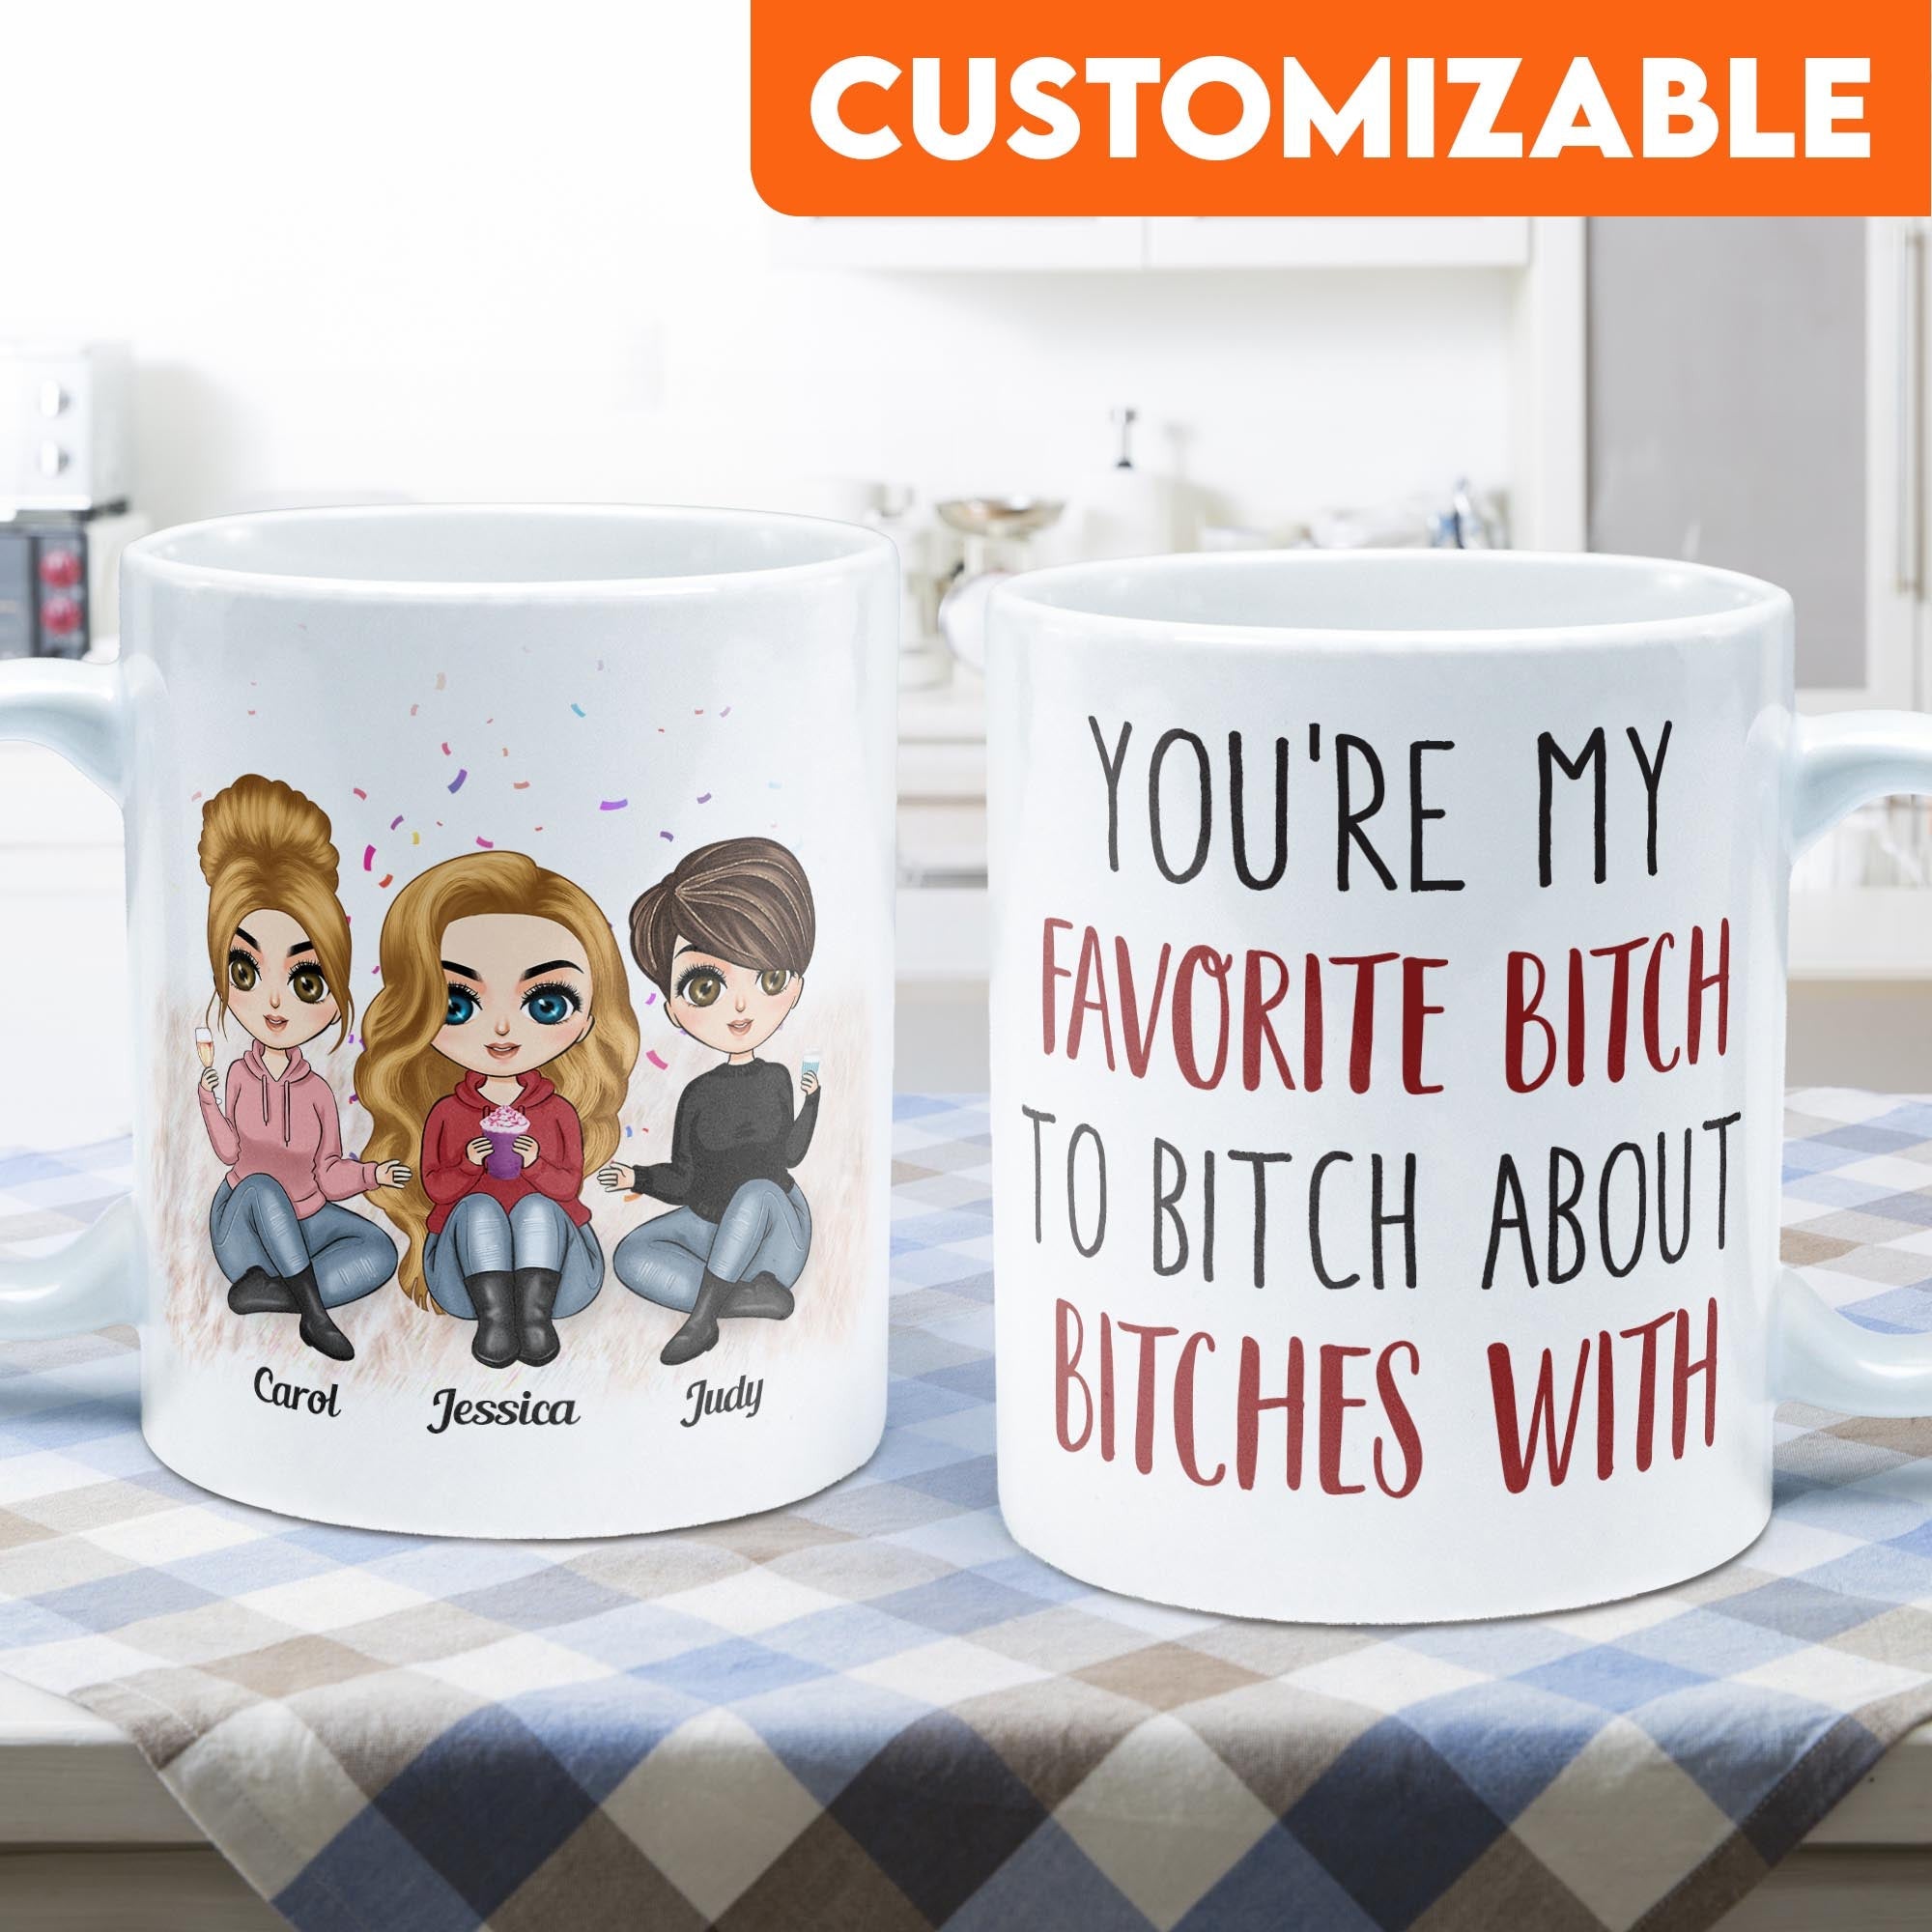 You're My Favorite Bitch To Bitch About Bitches With - Personalized Mug - Birthday & Christmas Gift For Bestie, Best Friend, BFF